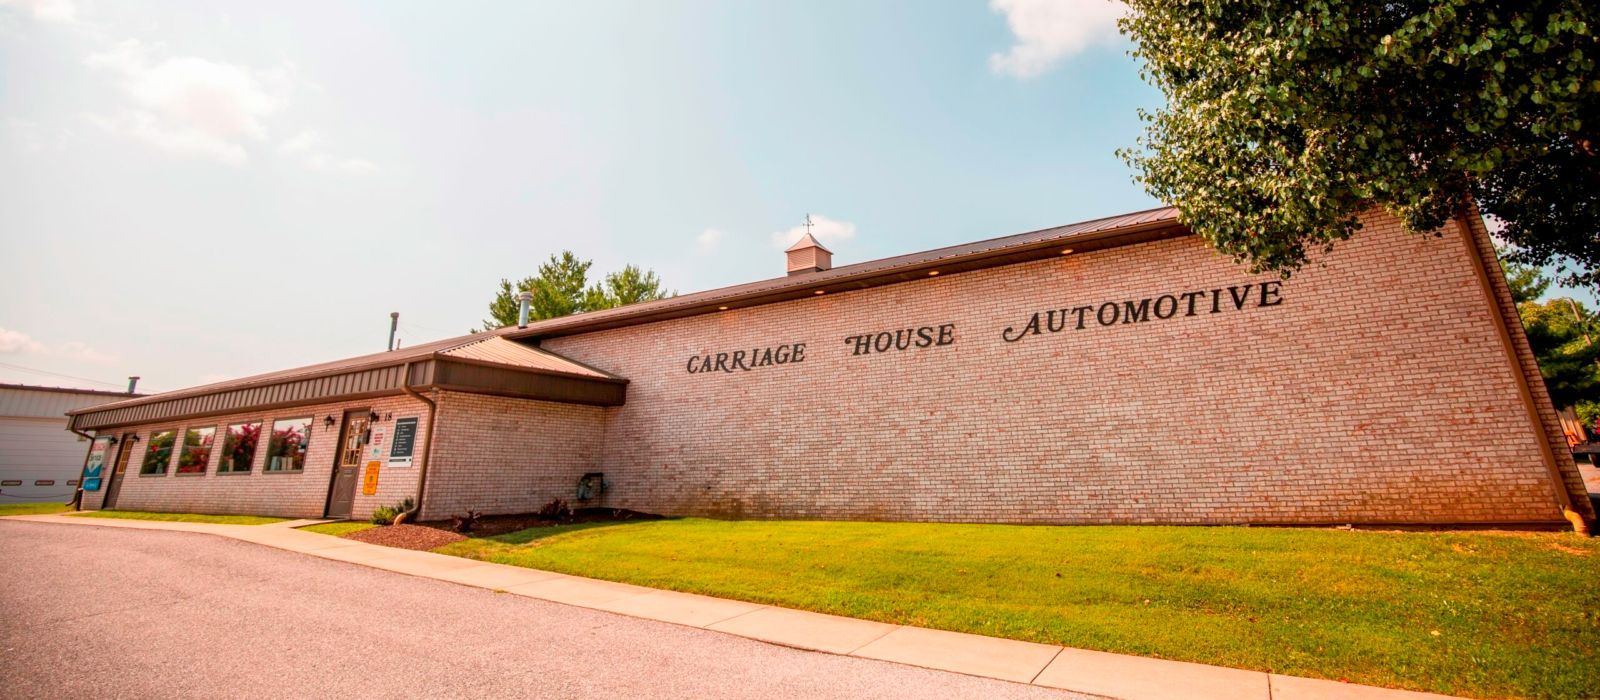 Trusted Auto Repair in Frederick, MD - Carriage House Automotive